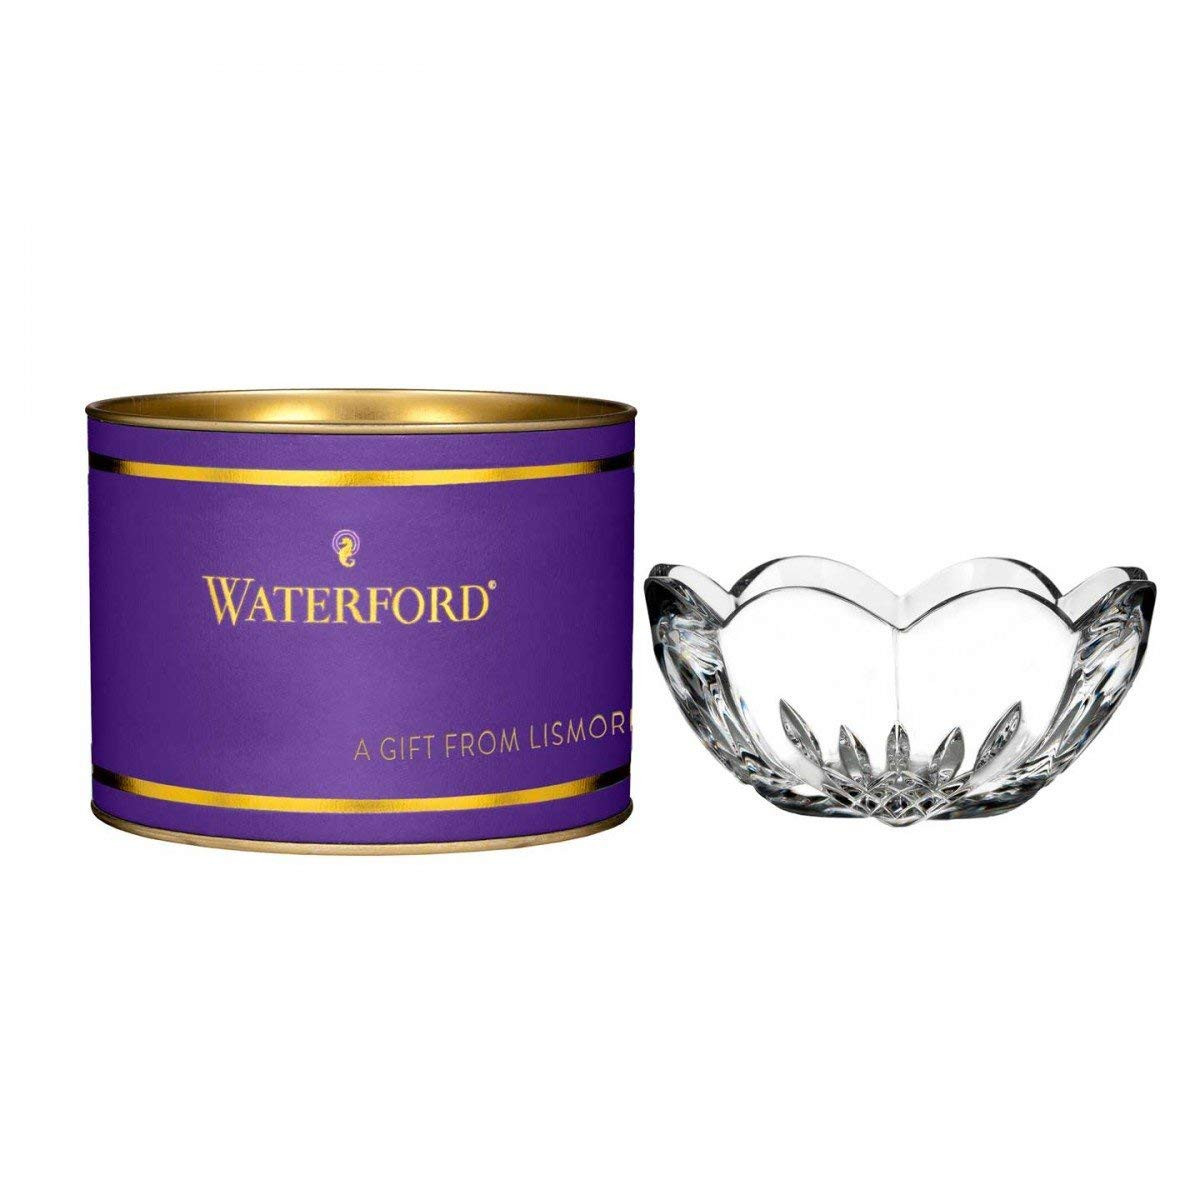 waterford lismore honey bud vase of amazon com waterford lismore heart bowl 4 home kitchen throughout 61yrkhhwhhl sl1200